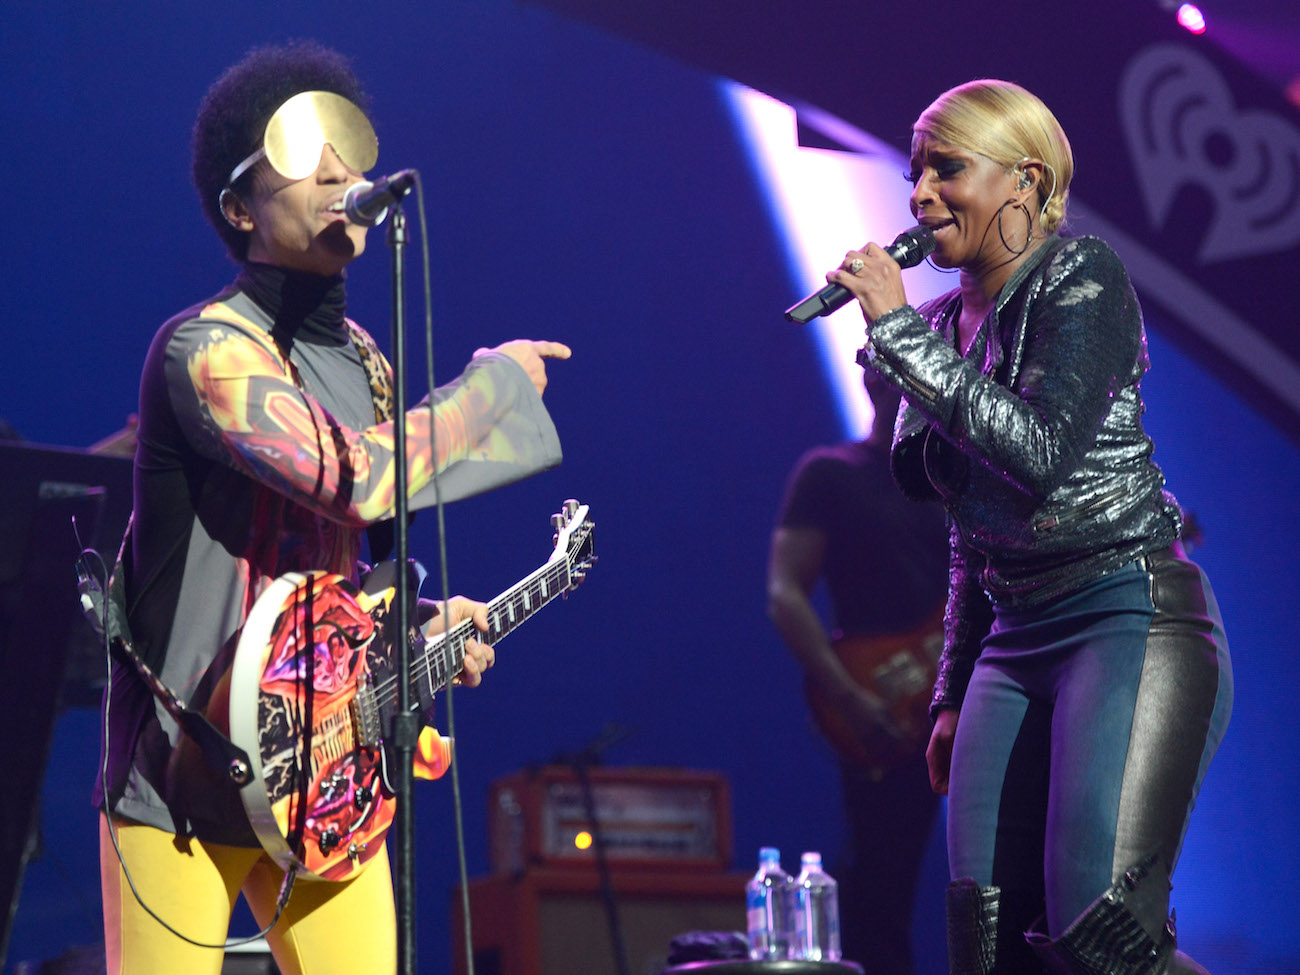 Prince and Mary J Blige performing together at the 2012 iHeartRadio Music Festival.